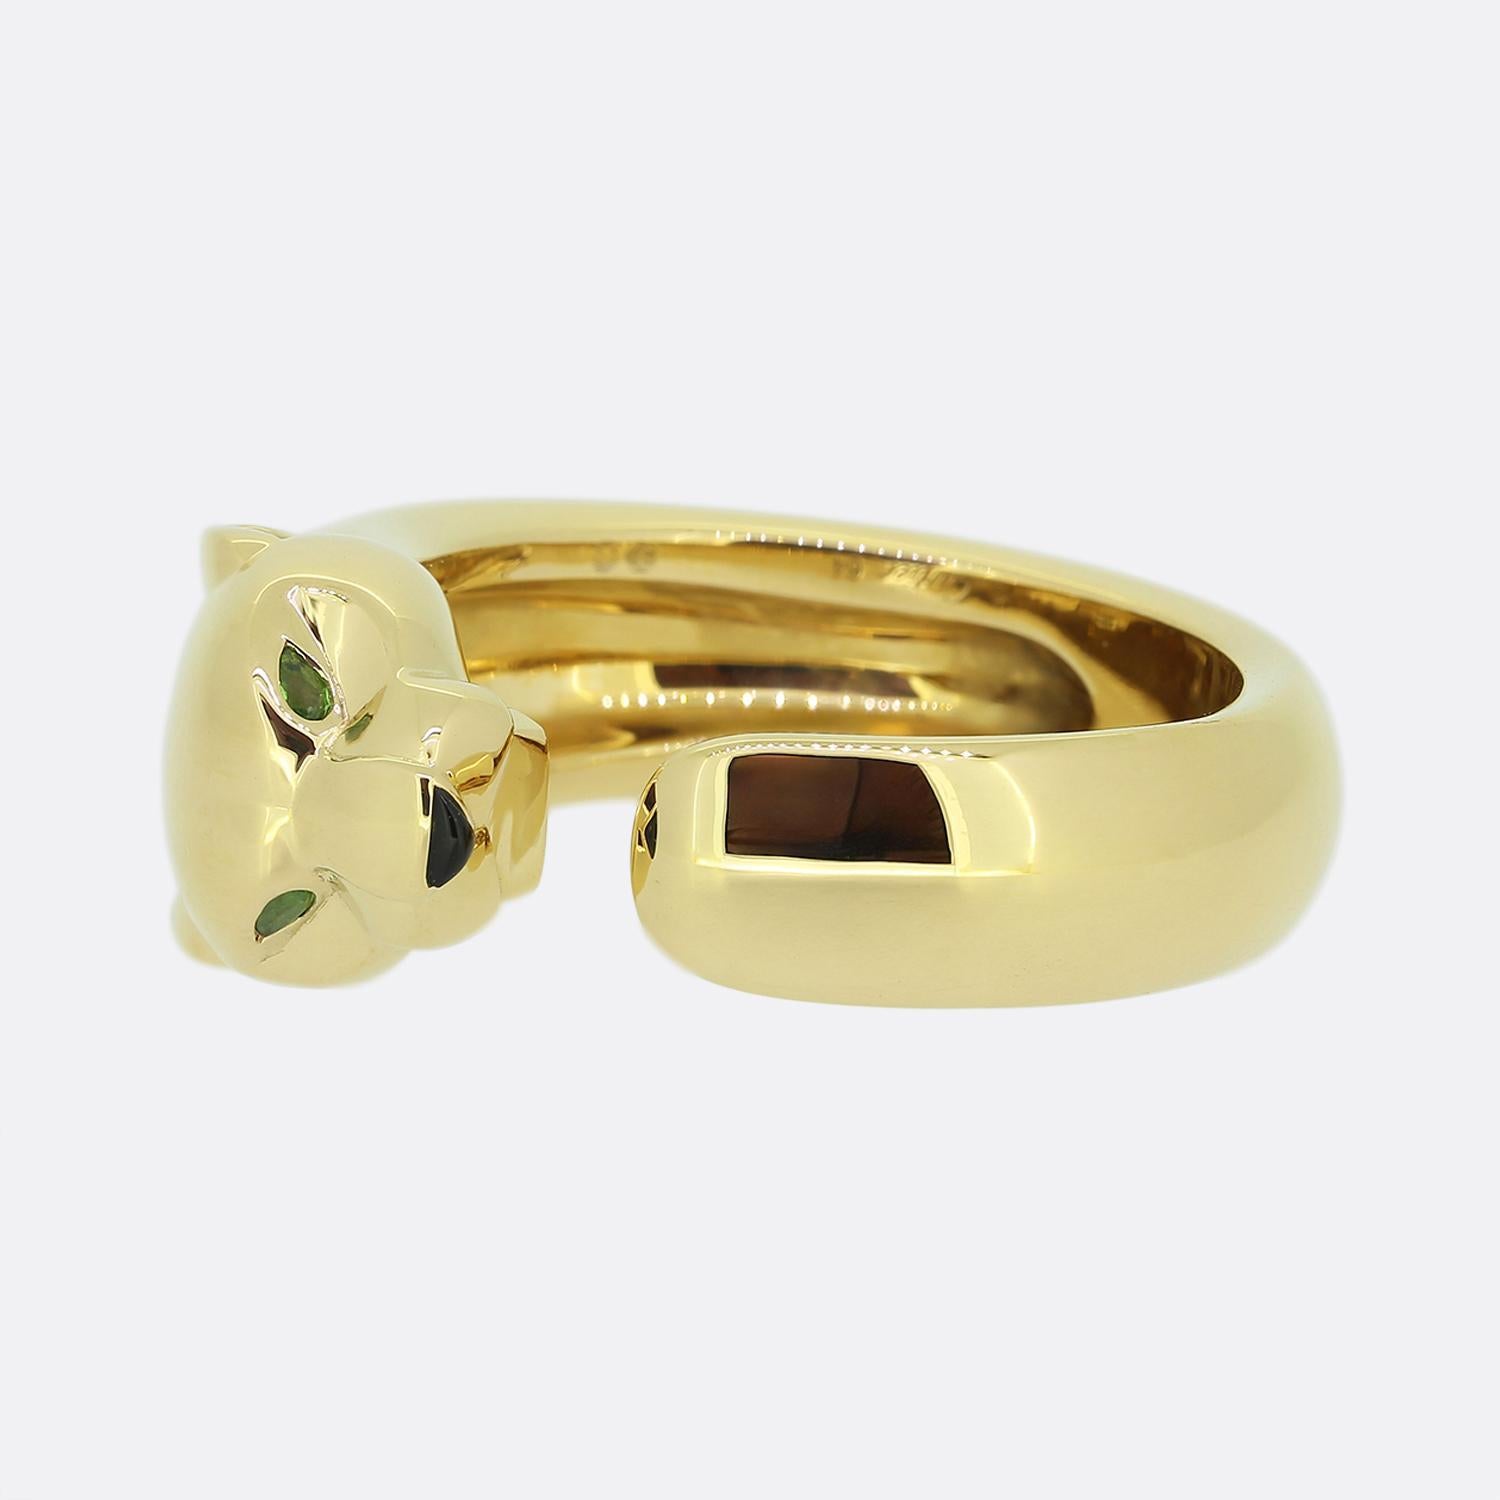 Here we have a wonderful ring from the world renowned jewellery house of Cartier. This piece has been crafted from 18ct yellow gold into the shape of panther with tsavorite set eyes and an onyx nose. The highly detailed panther appears predatory,